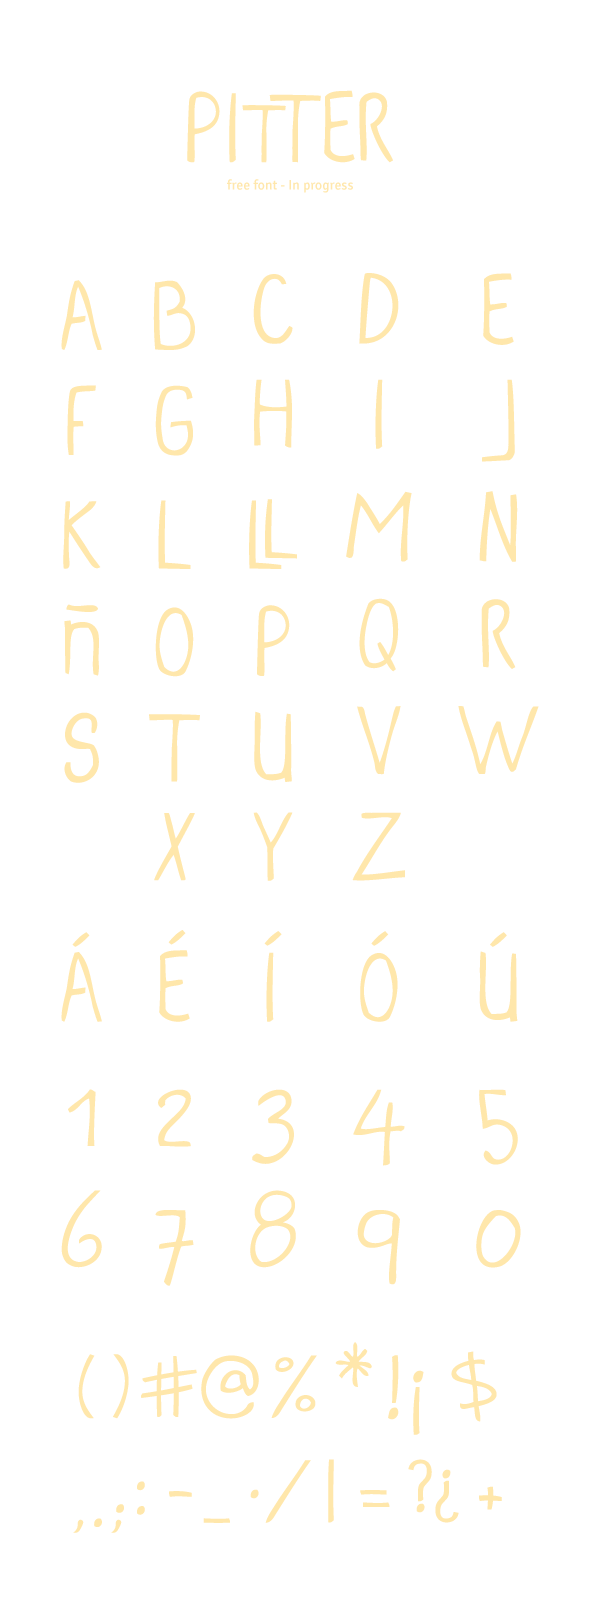 PITTER (free font coming soon)